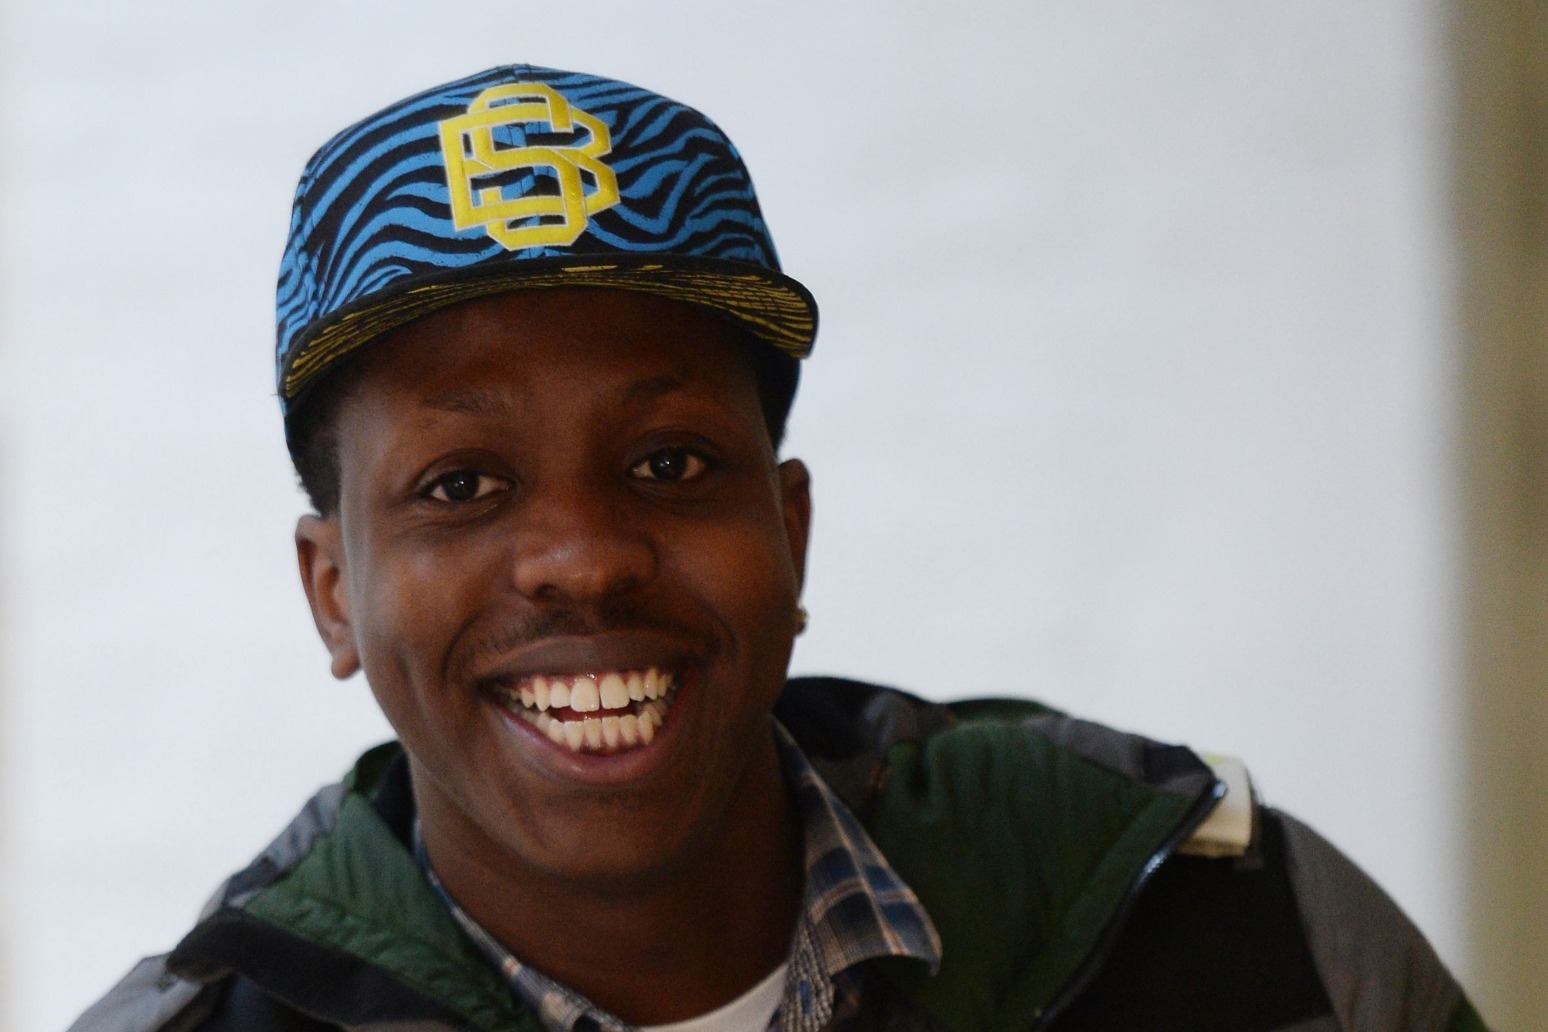 Jamal Edwards to receive posthumous award marking contribution to music industry 